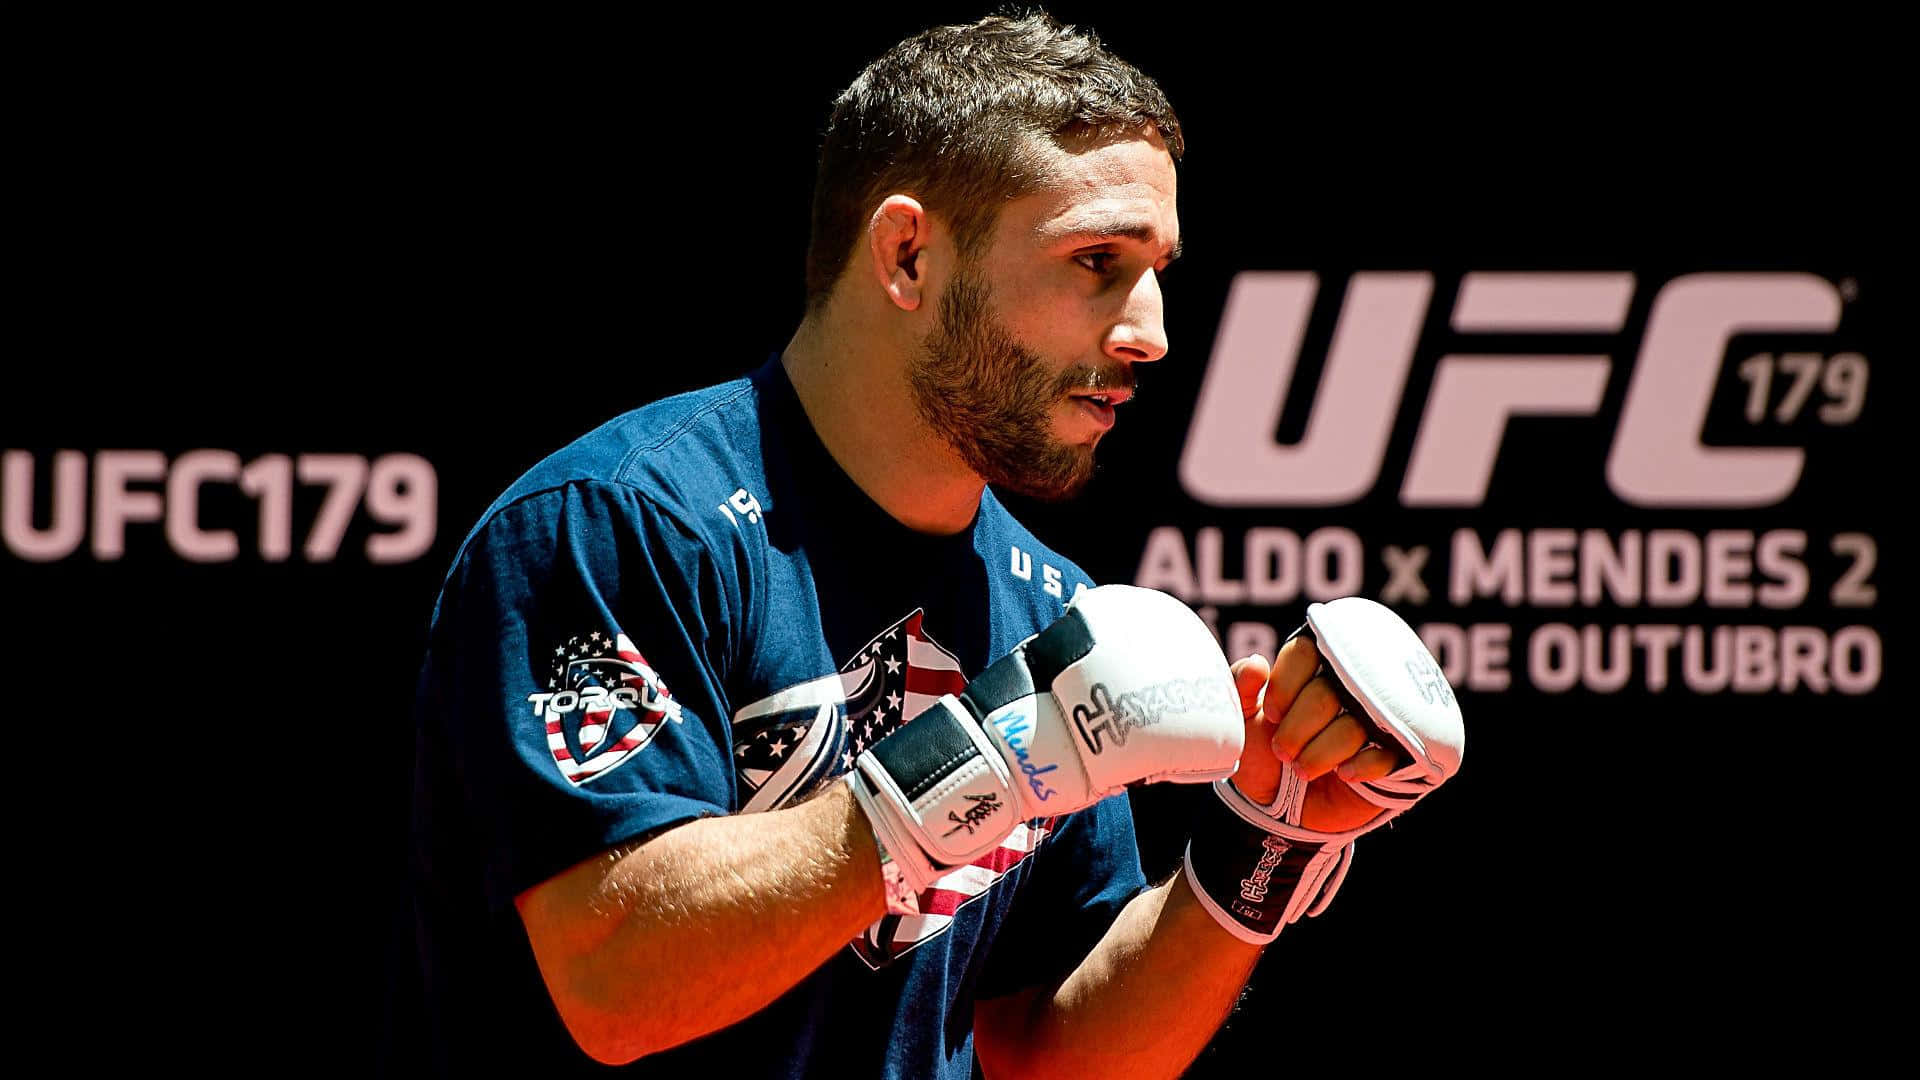 Chad Mendes Ufc 179 Fight Wallpaper